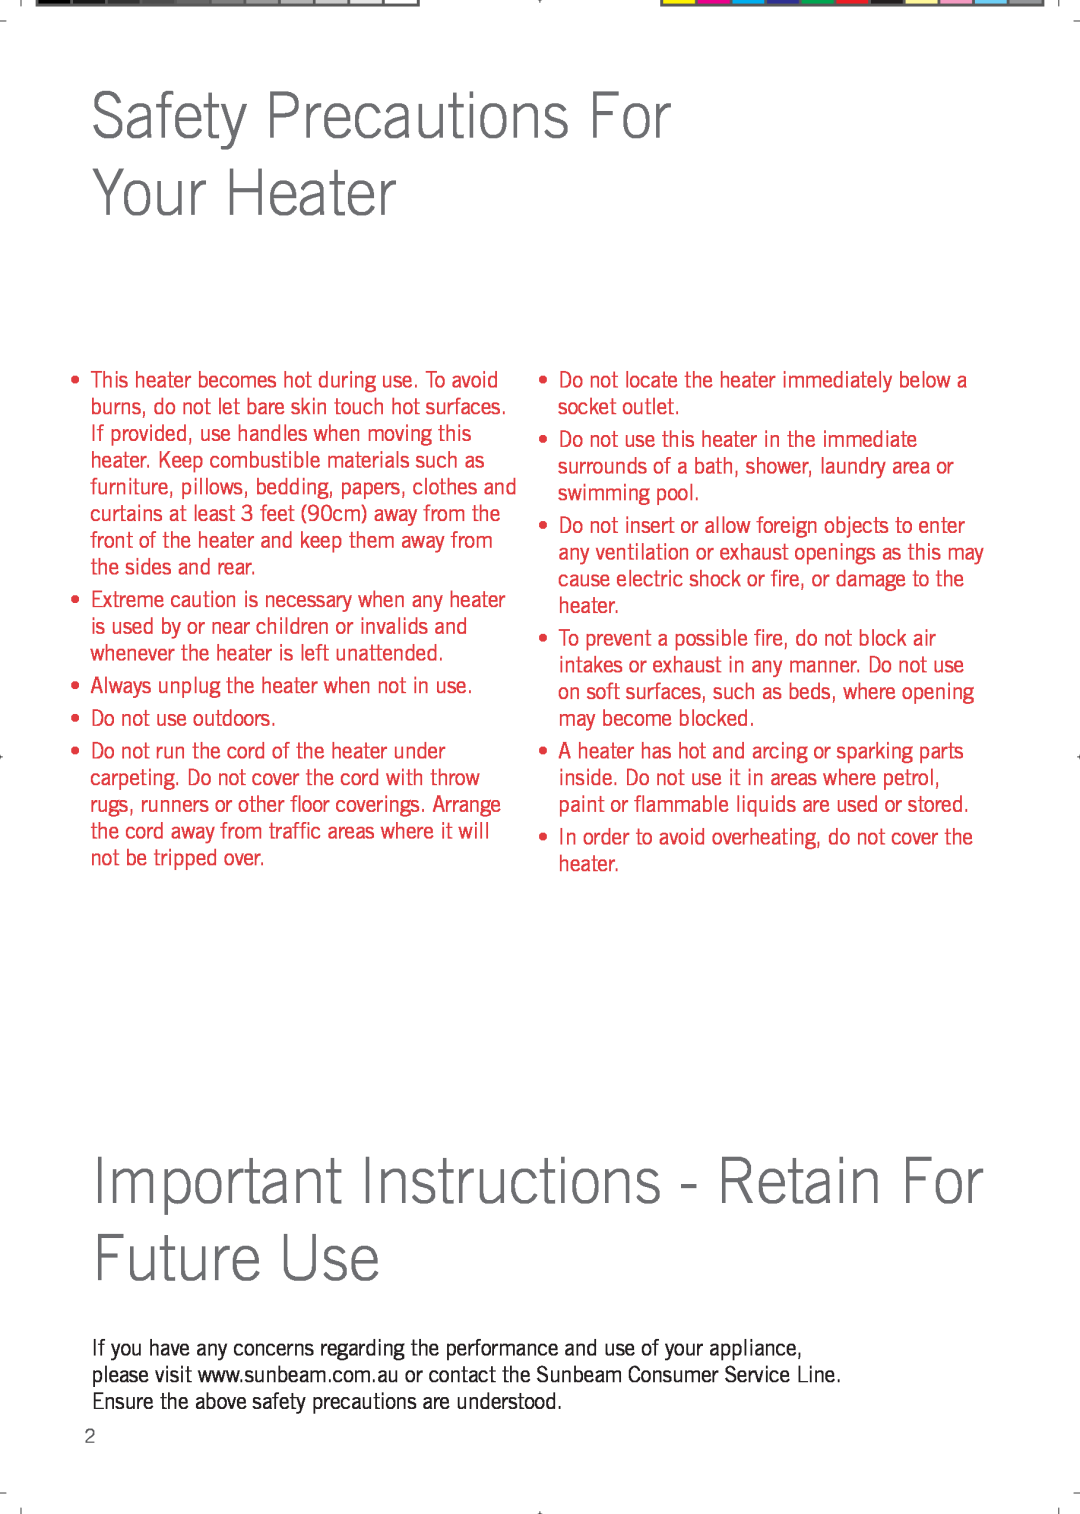 Sunbeam HE2050 manual Safety Precautions For Your Heater, Important Instructions - Retain For Future Use 